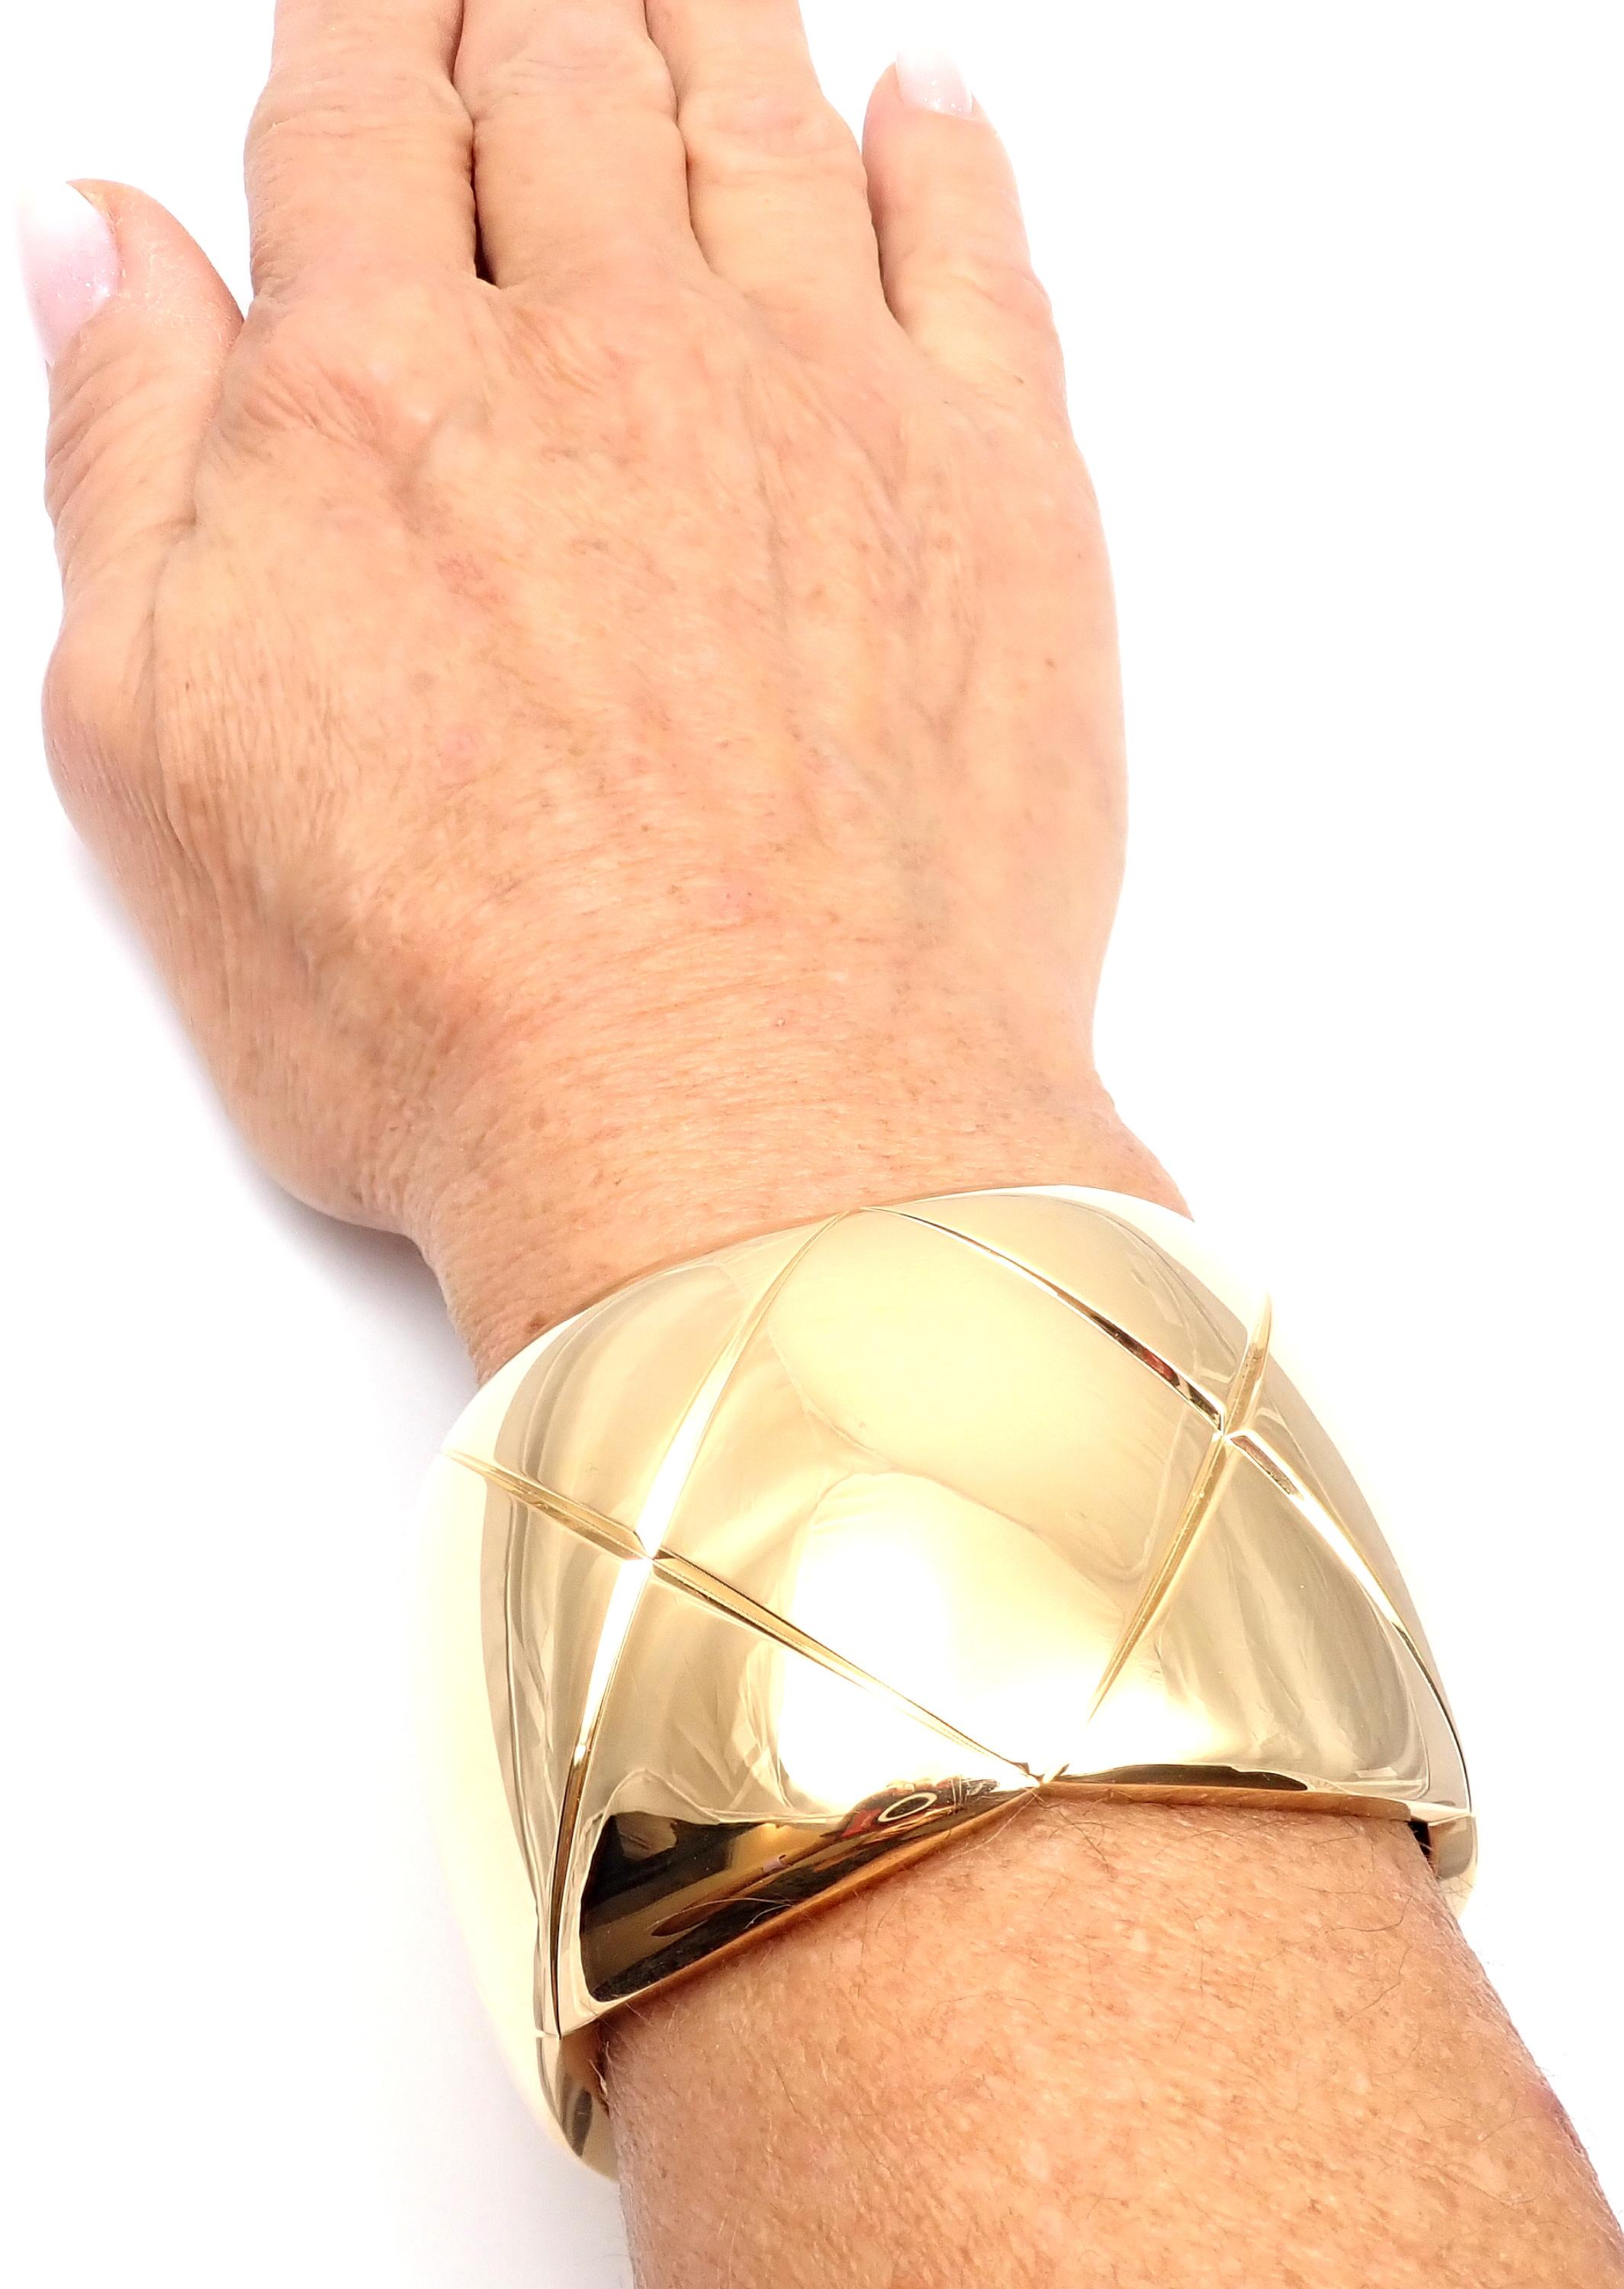 Chanel Coco Crush Yellow Gold Cuff Bangle Bracelet In Excellent Condition For Sale In Holland, PA